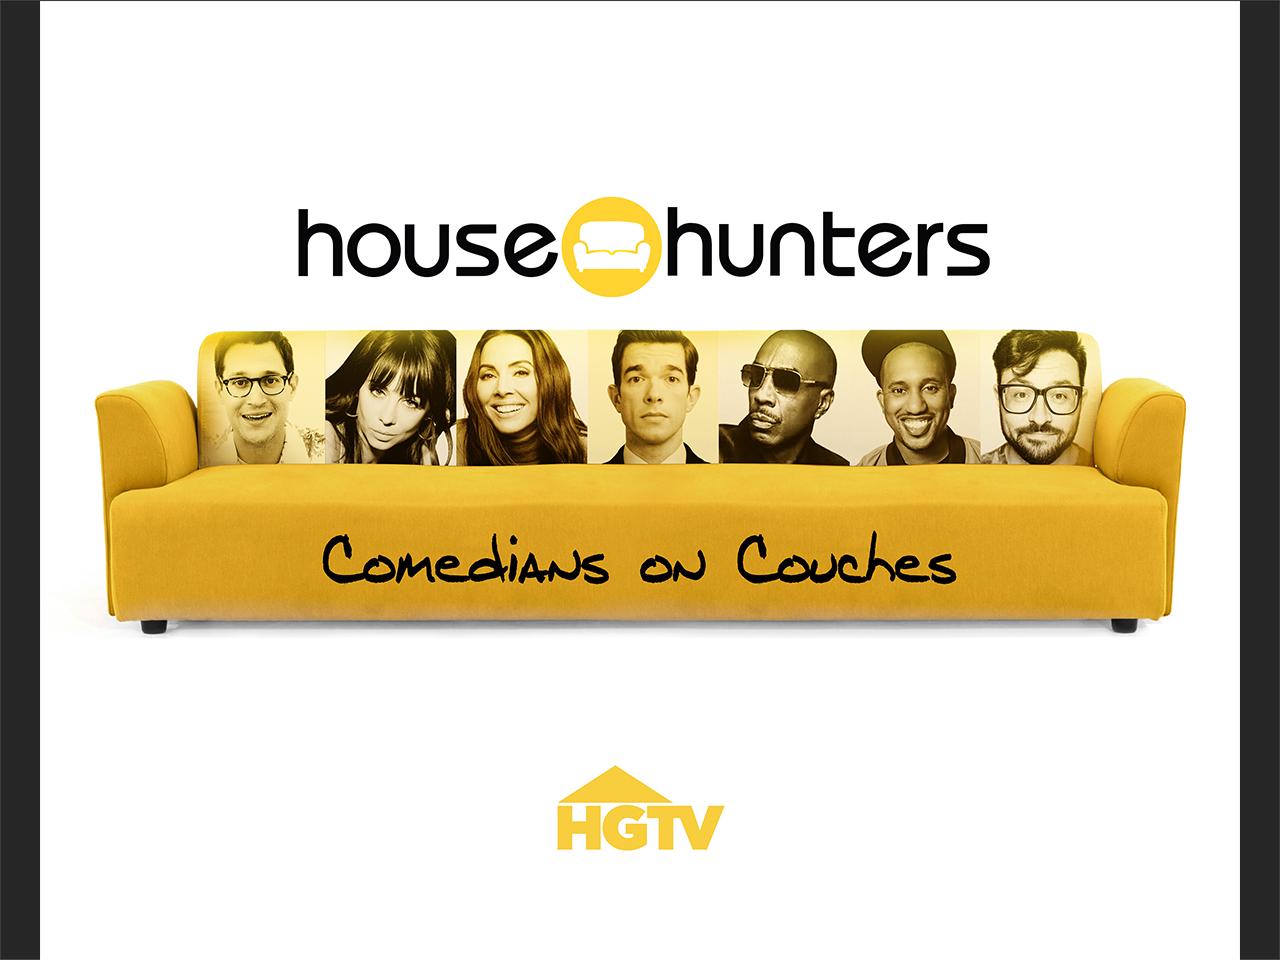 Hgtv Sends Up Its Own In Hilarious New Series House Hunters